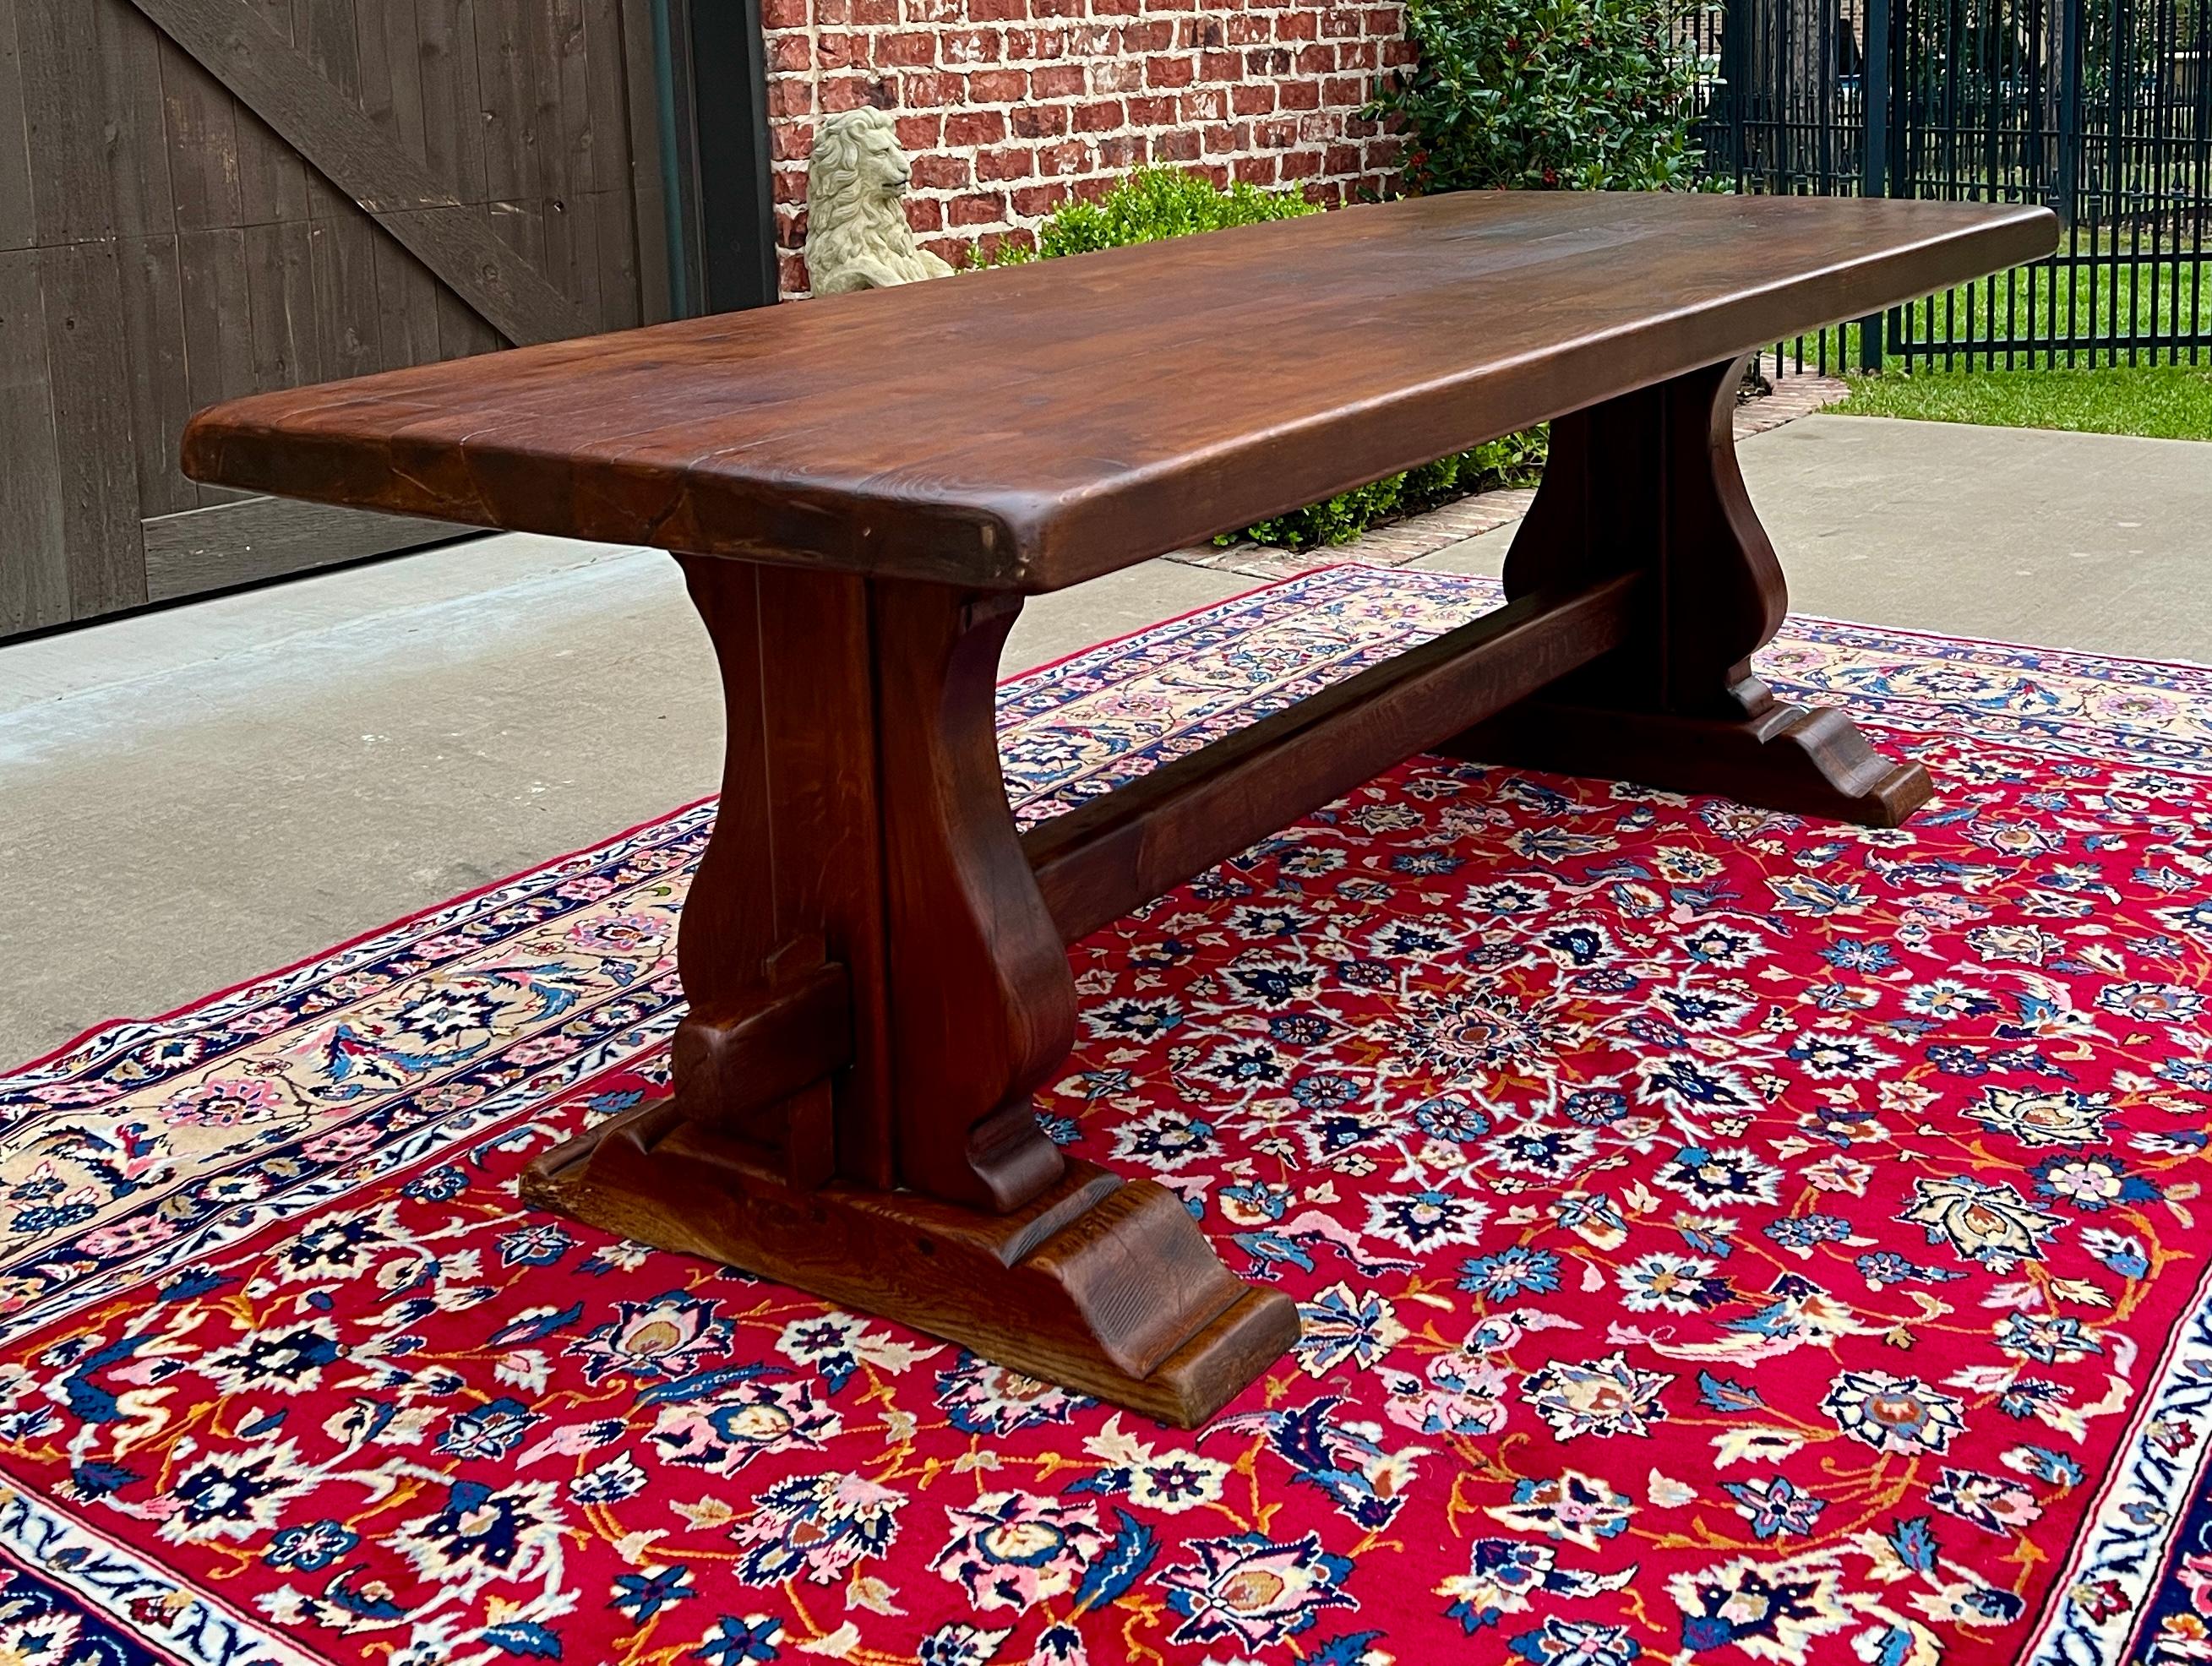 EXCELLENT LARGE Antique French Country Oak Farmhouse Farm Table Dining Table Desk Office Conference Library Table~~Over 7 Feet Wide~~

This beautiful table has the French Country 